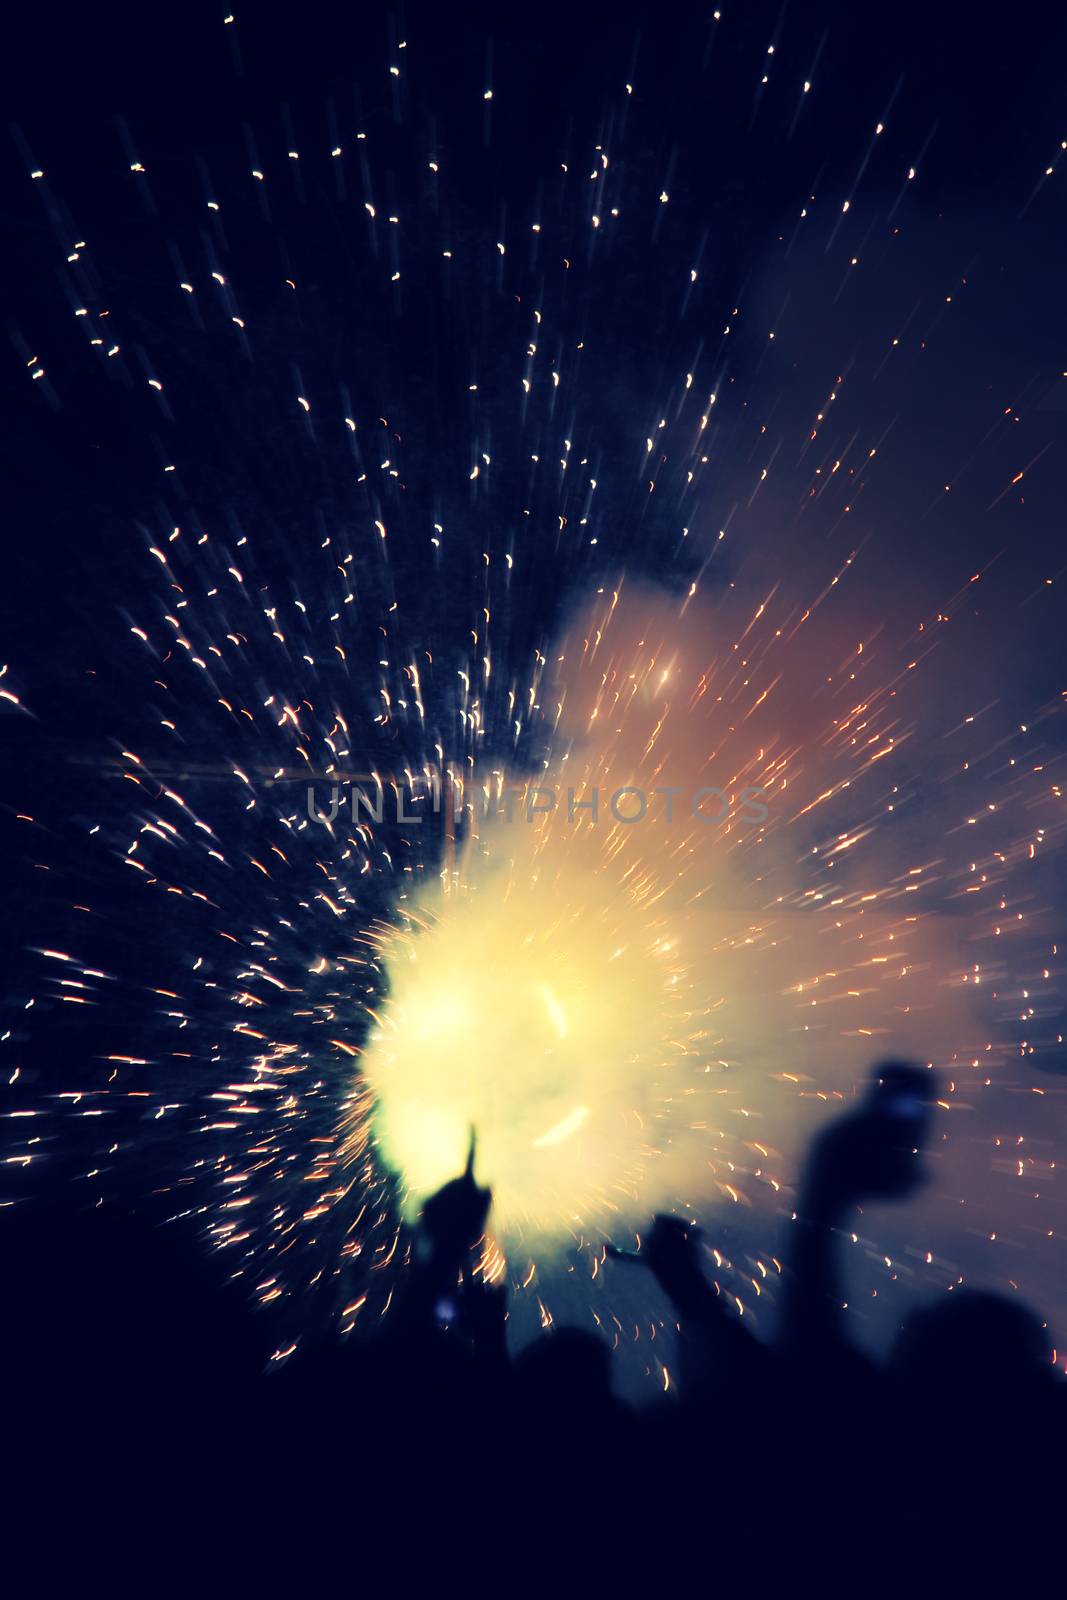 Firecrackers on occasion of Indian festival of lights, Diwali by yands